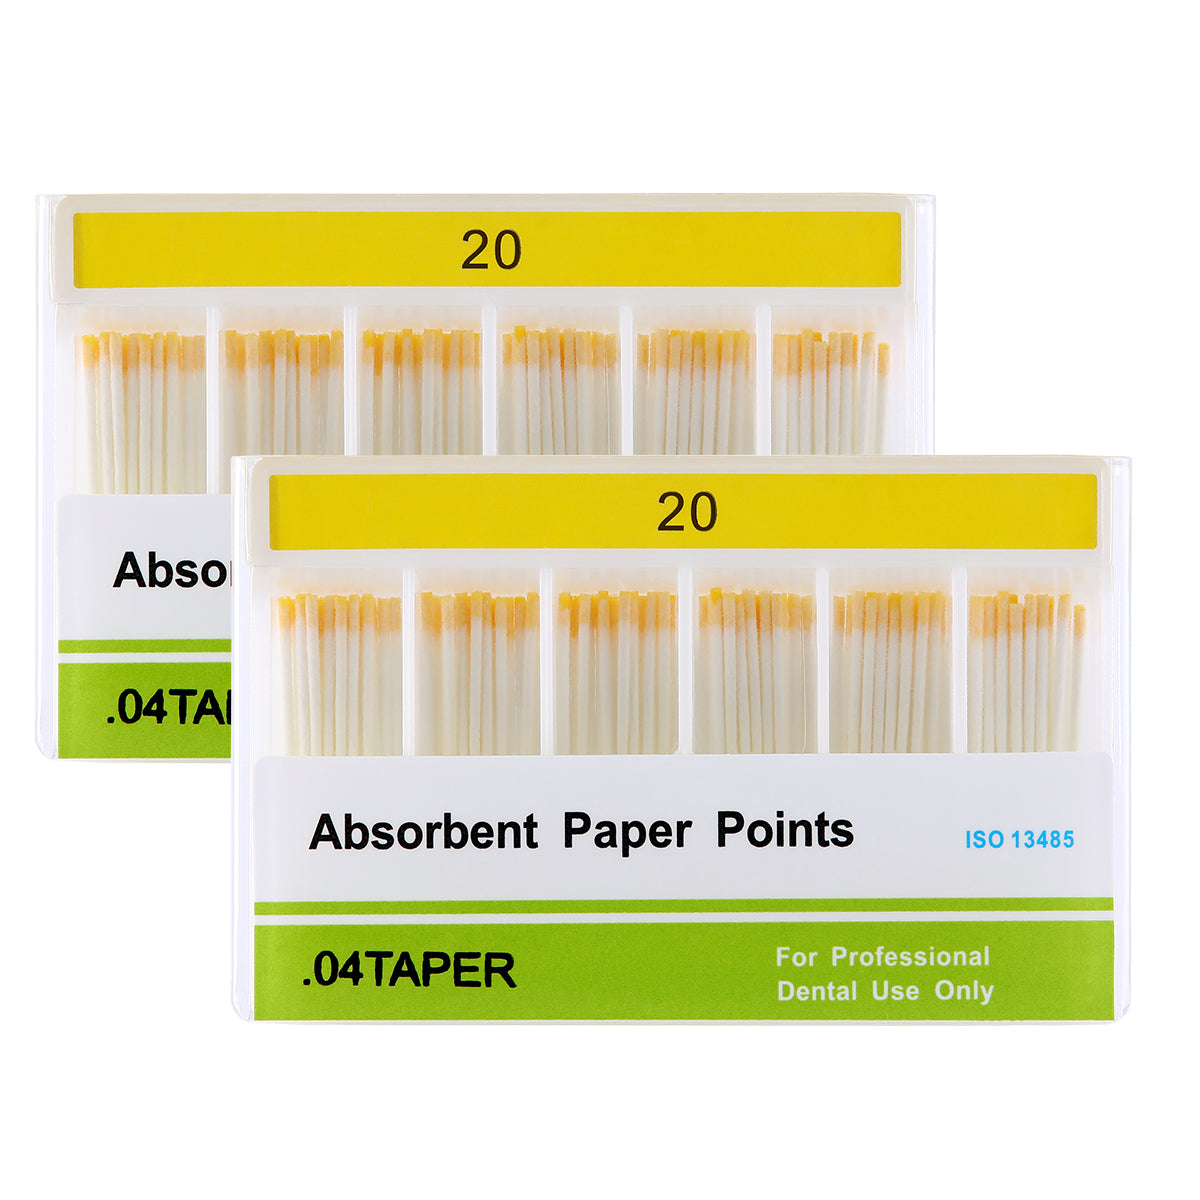 2 Boxes Absorbent Paper Points #20 Taper Size 0.04 Color Coded 100/Box - azdentall.com